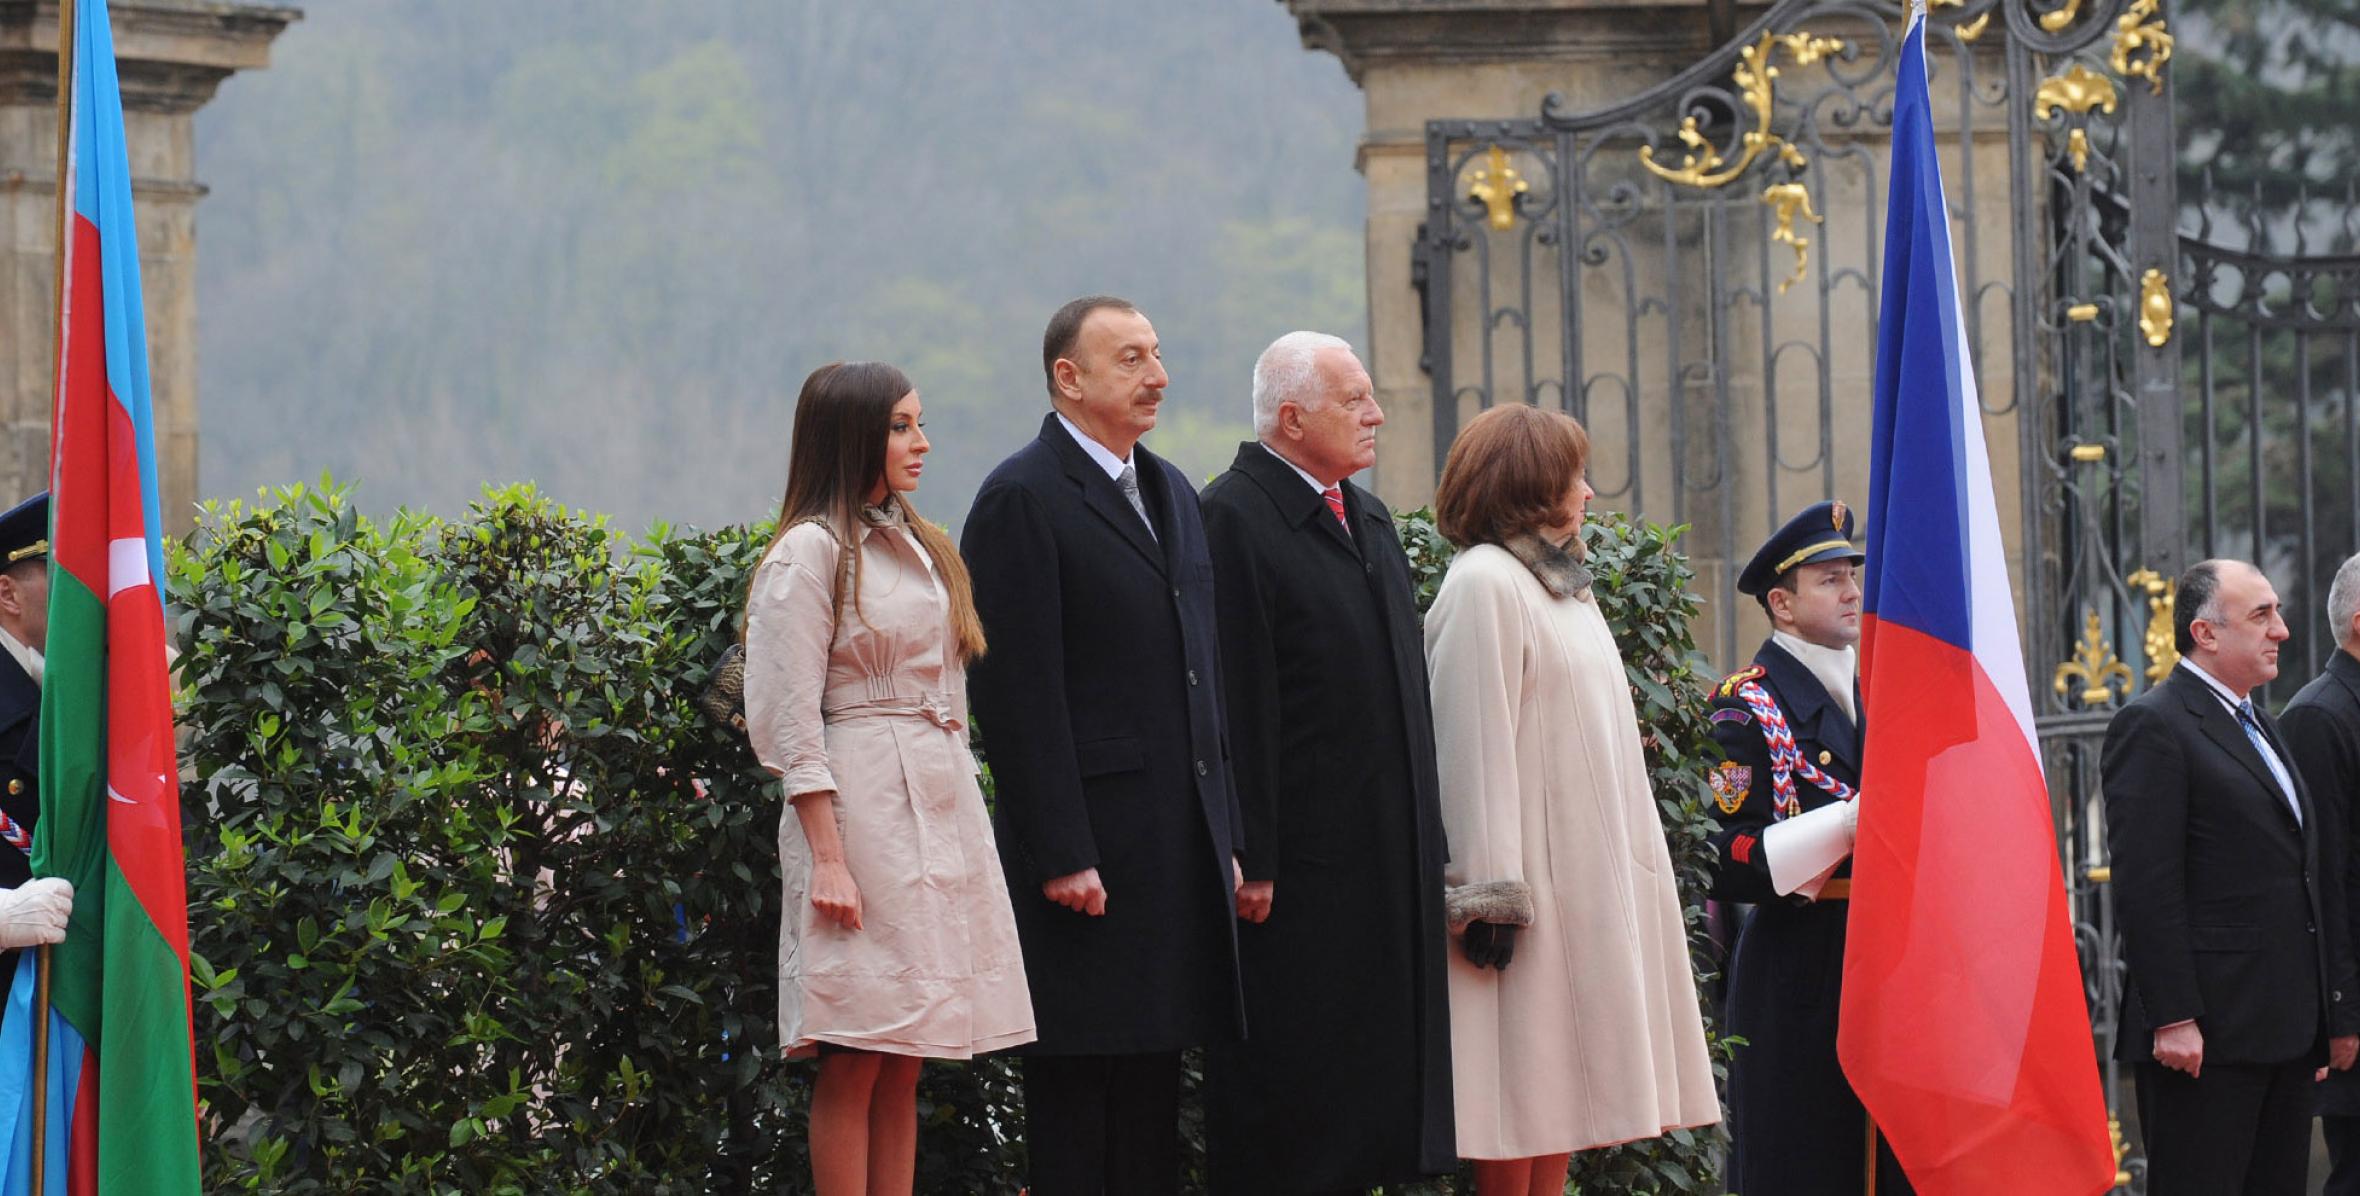 Official welcoming ceremony of Ilham Aliyev was held